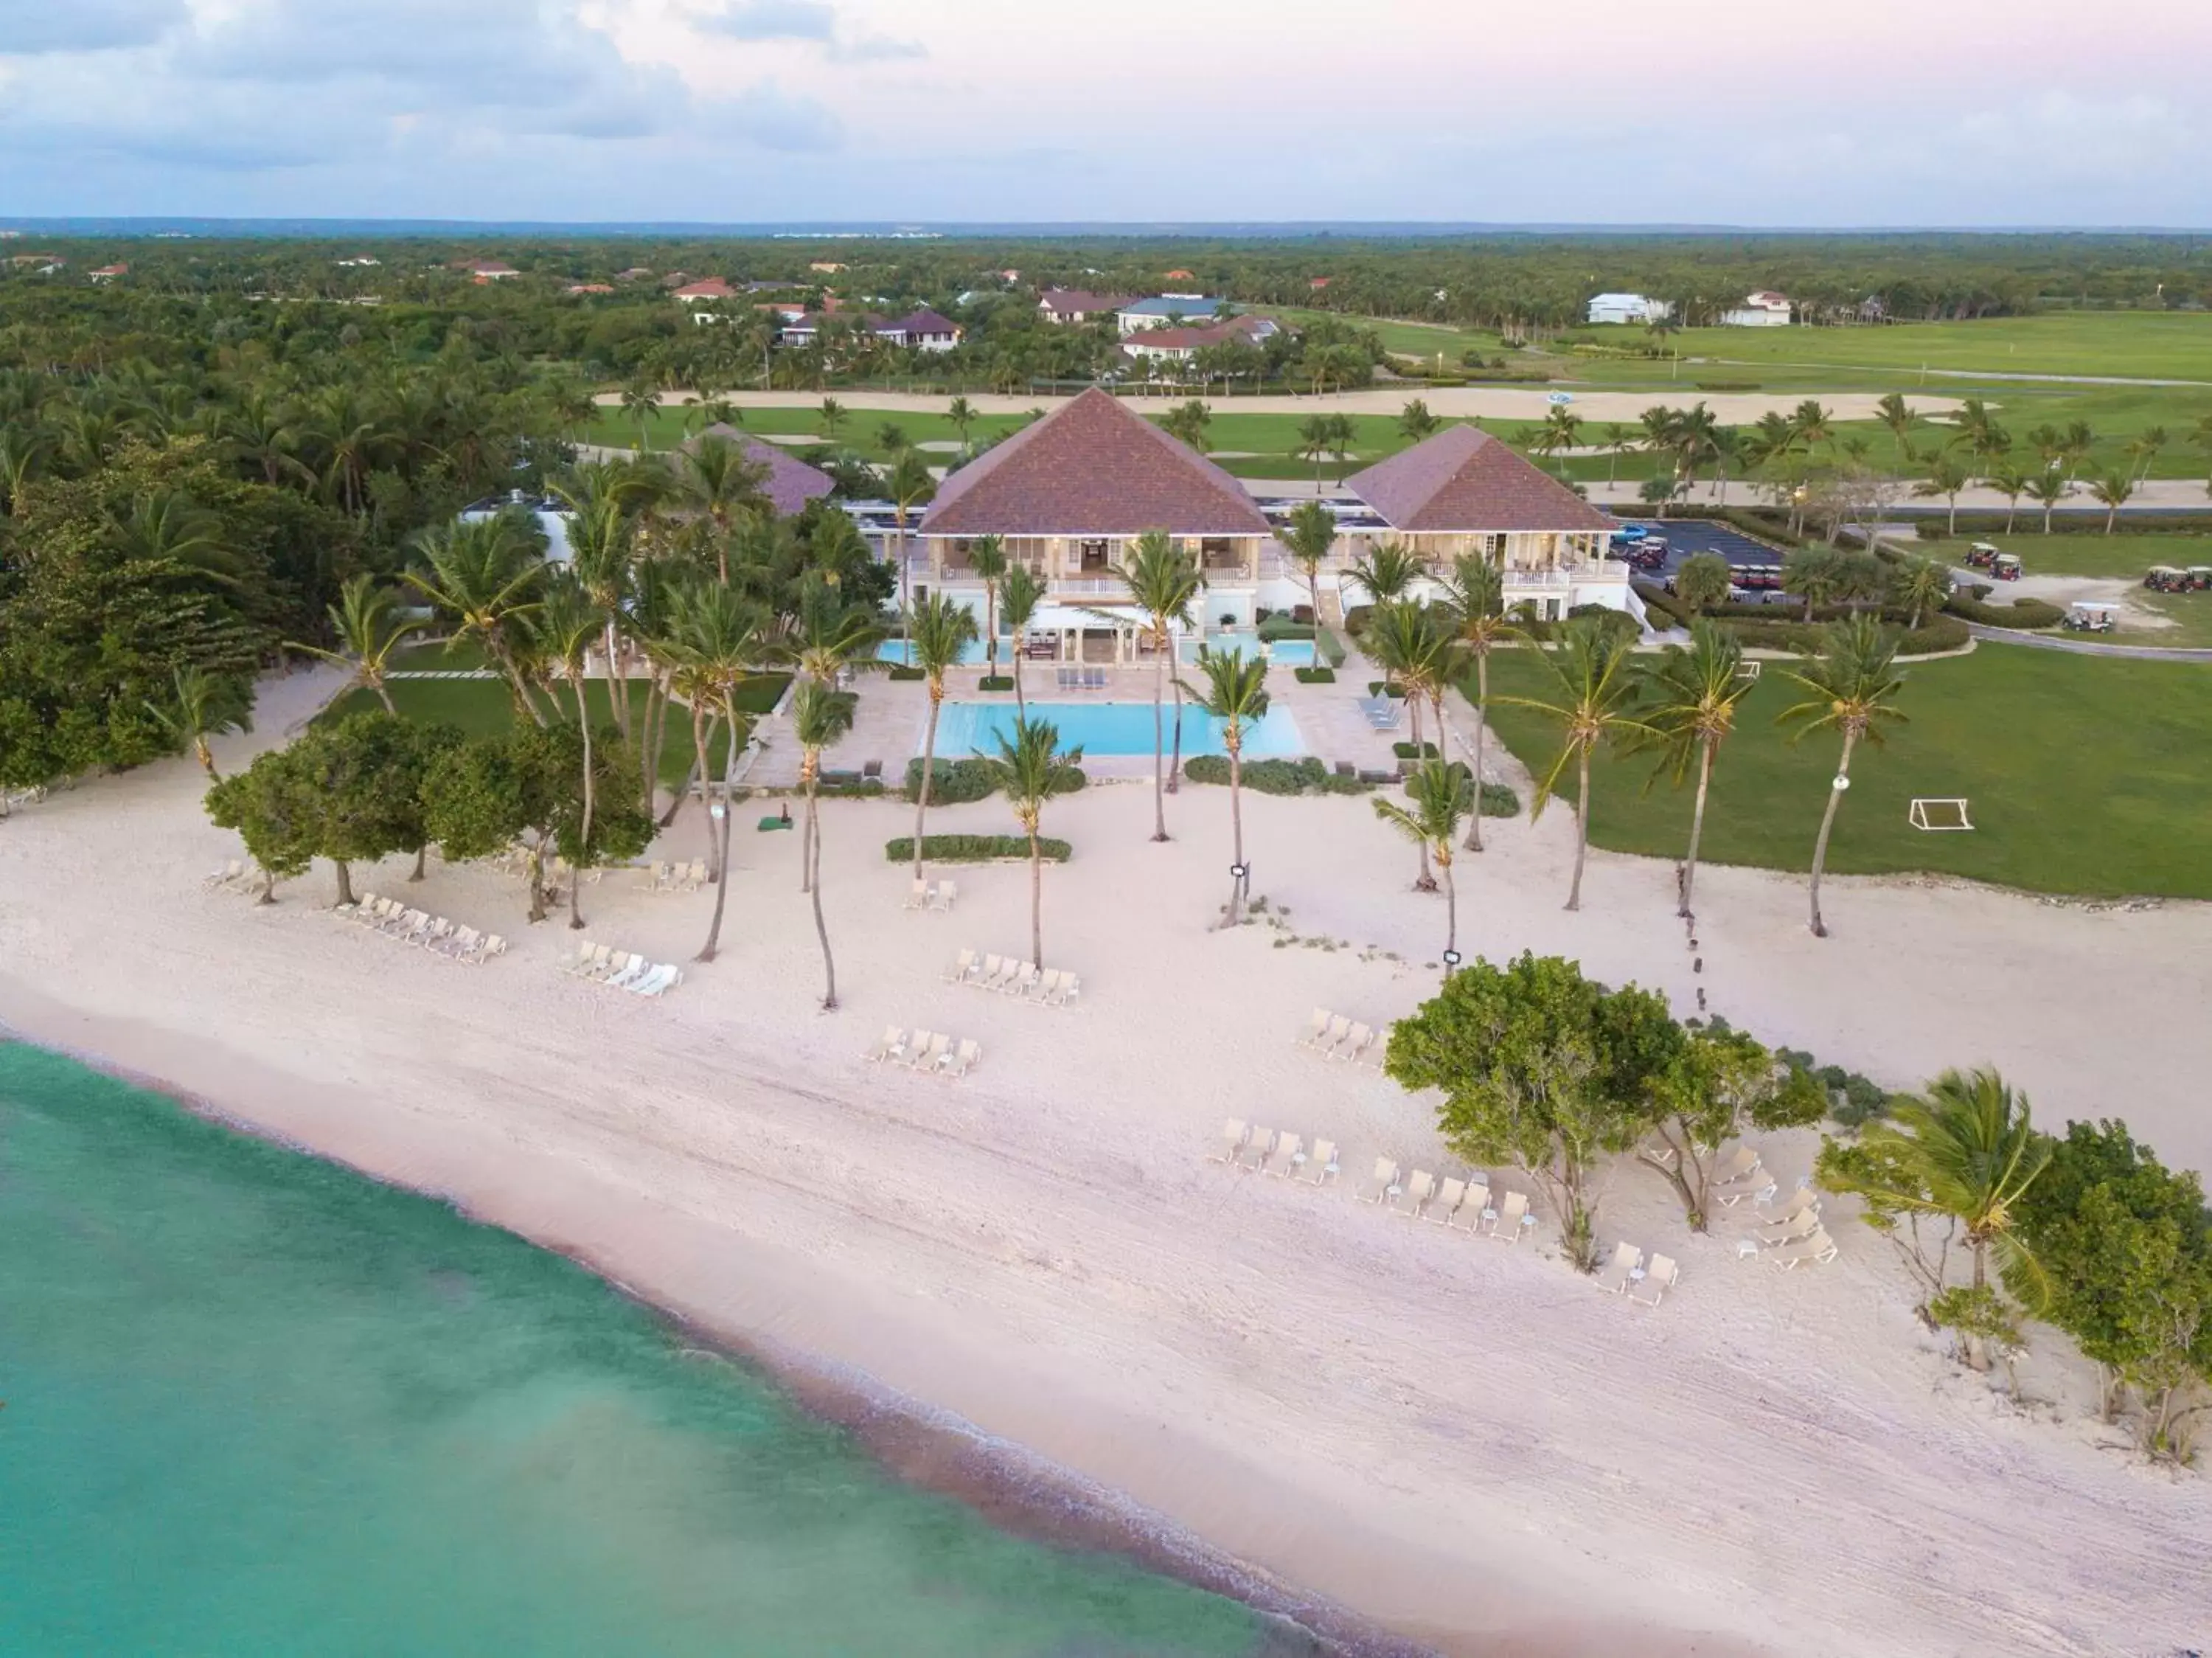 Off site, Bird's-eye View in Tortuga Bay